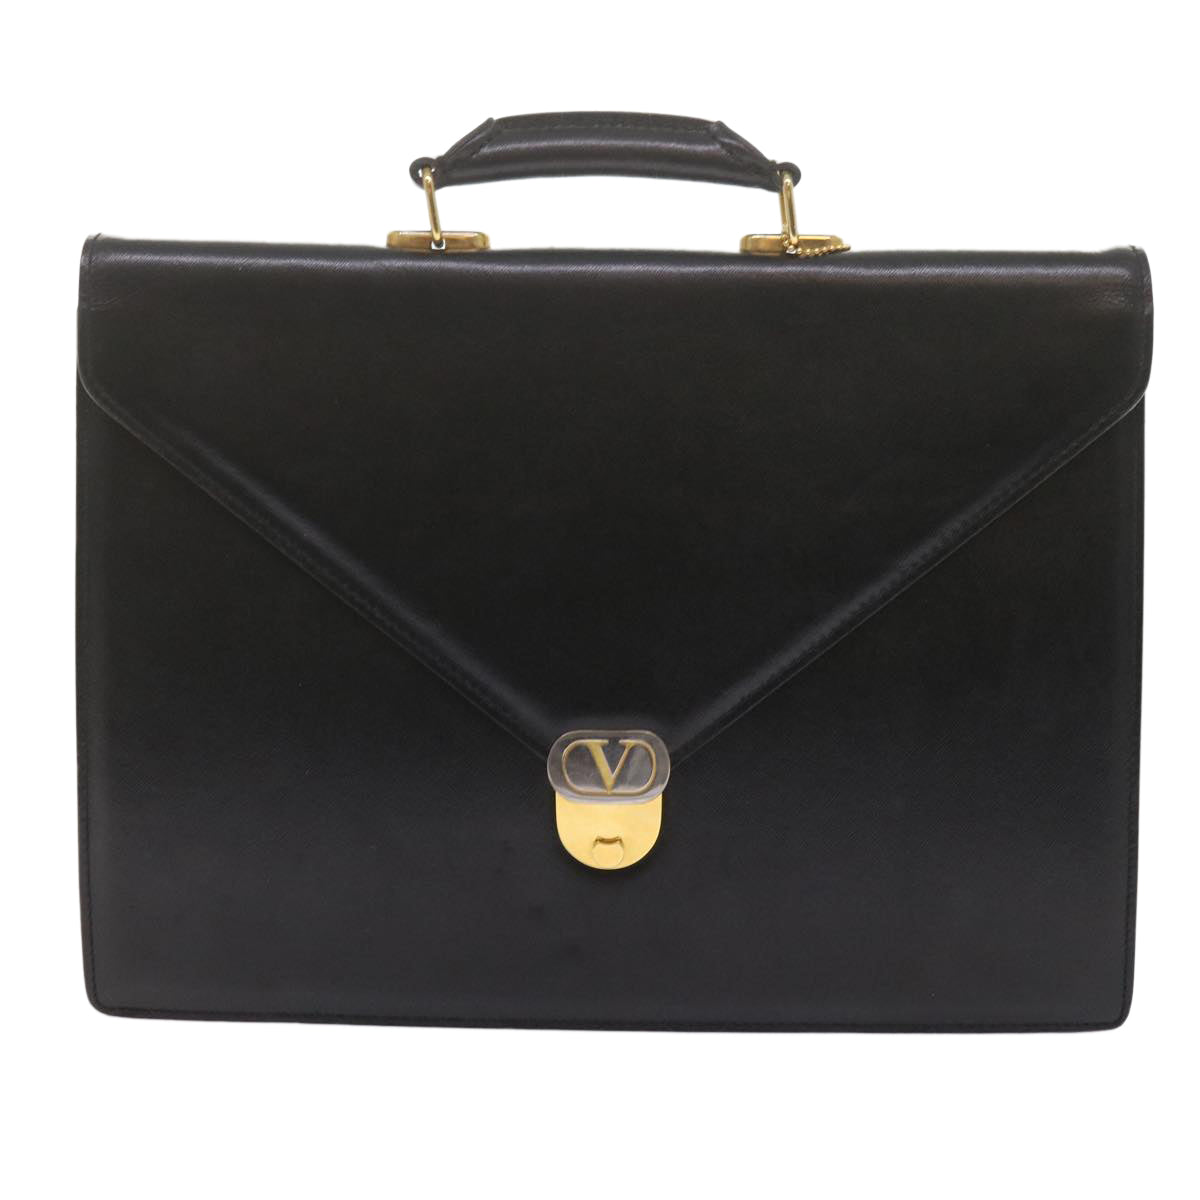 VALENTINO Business Bag Leather Black Auth bs10775